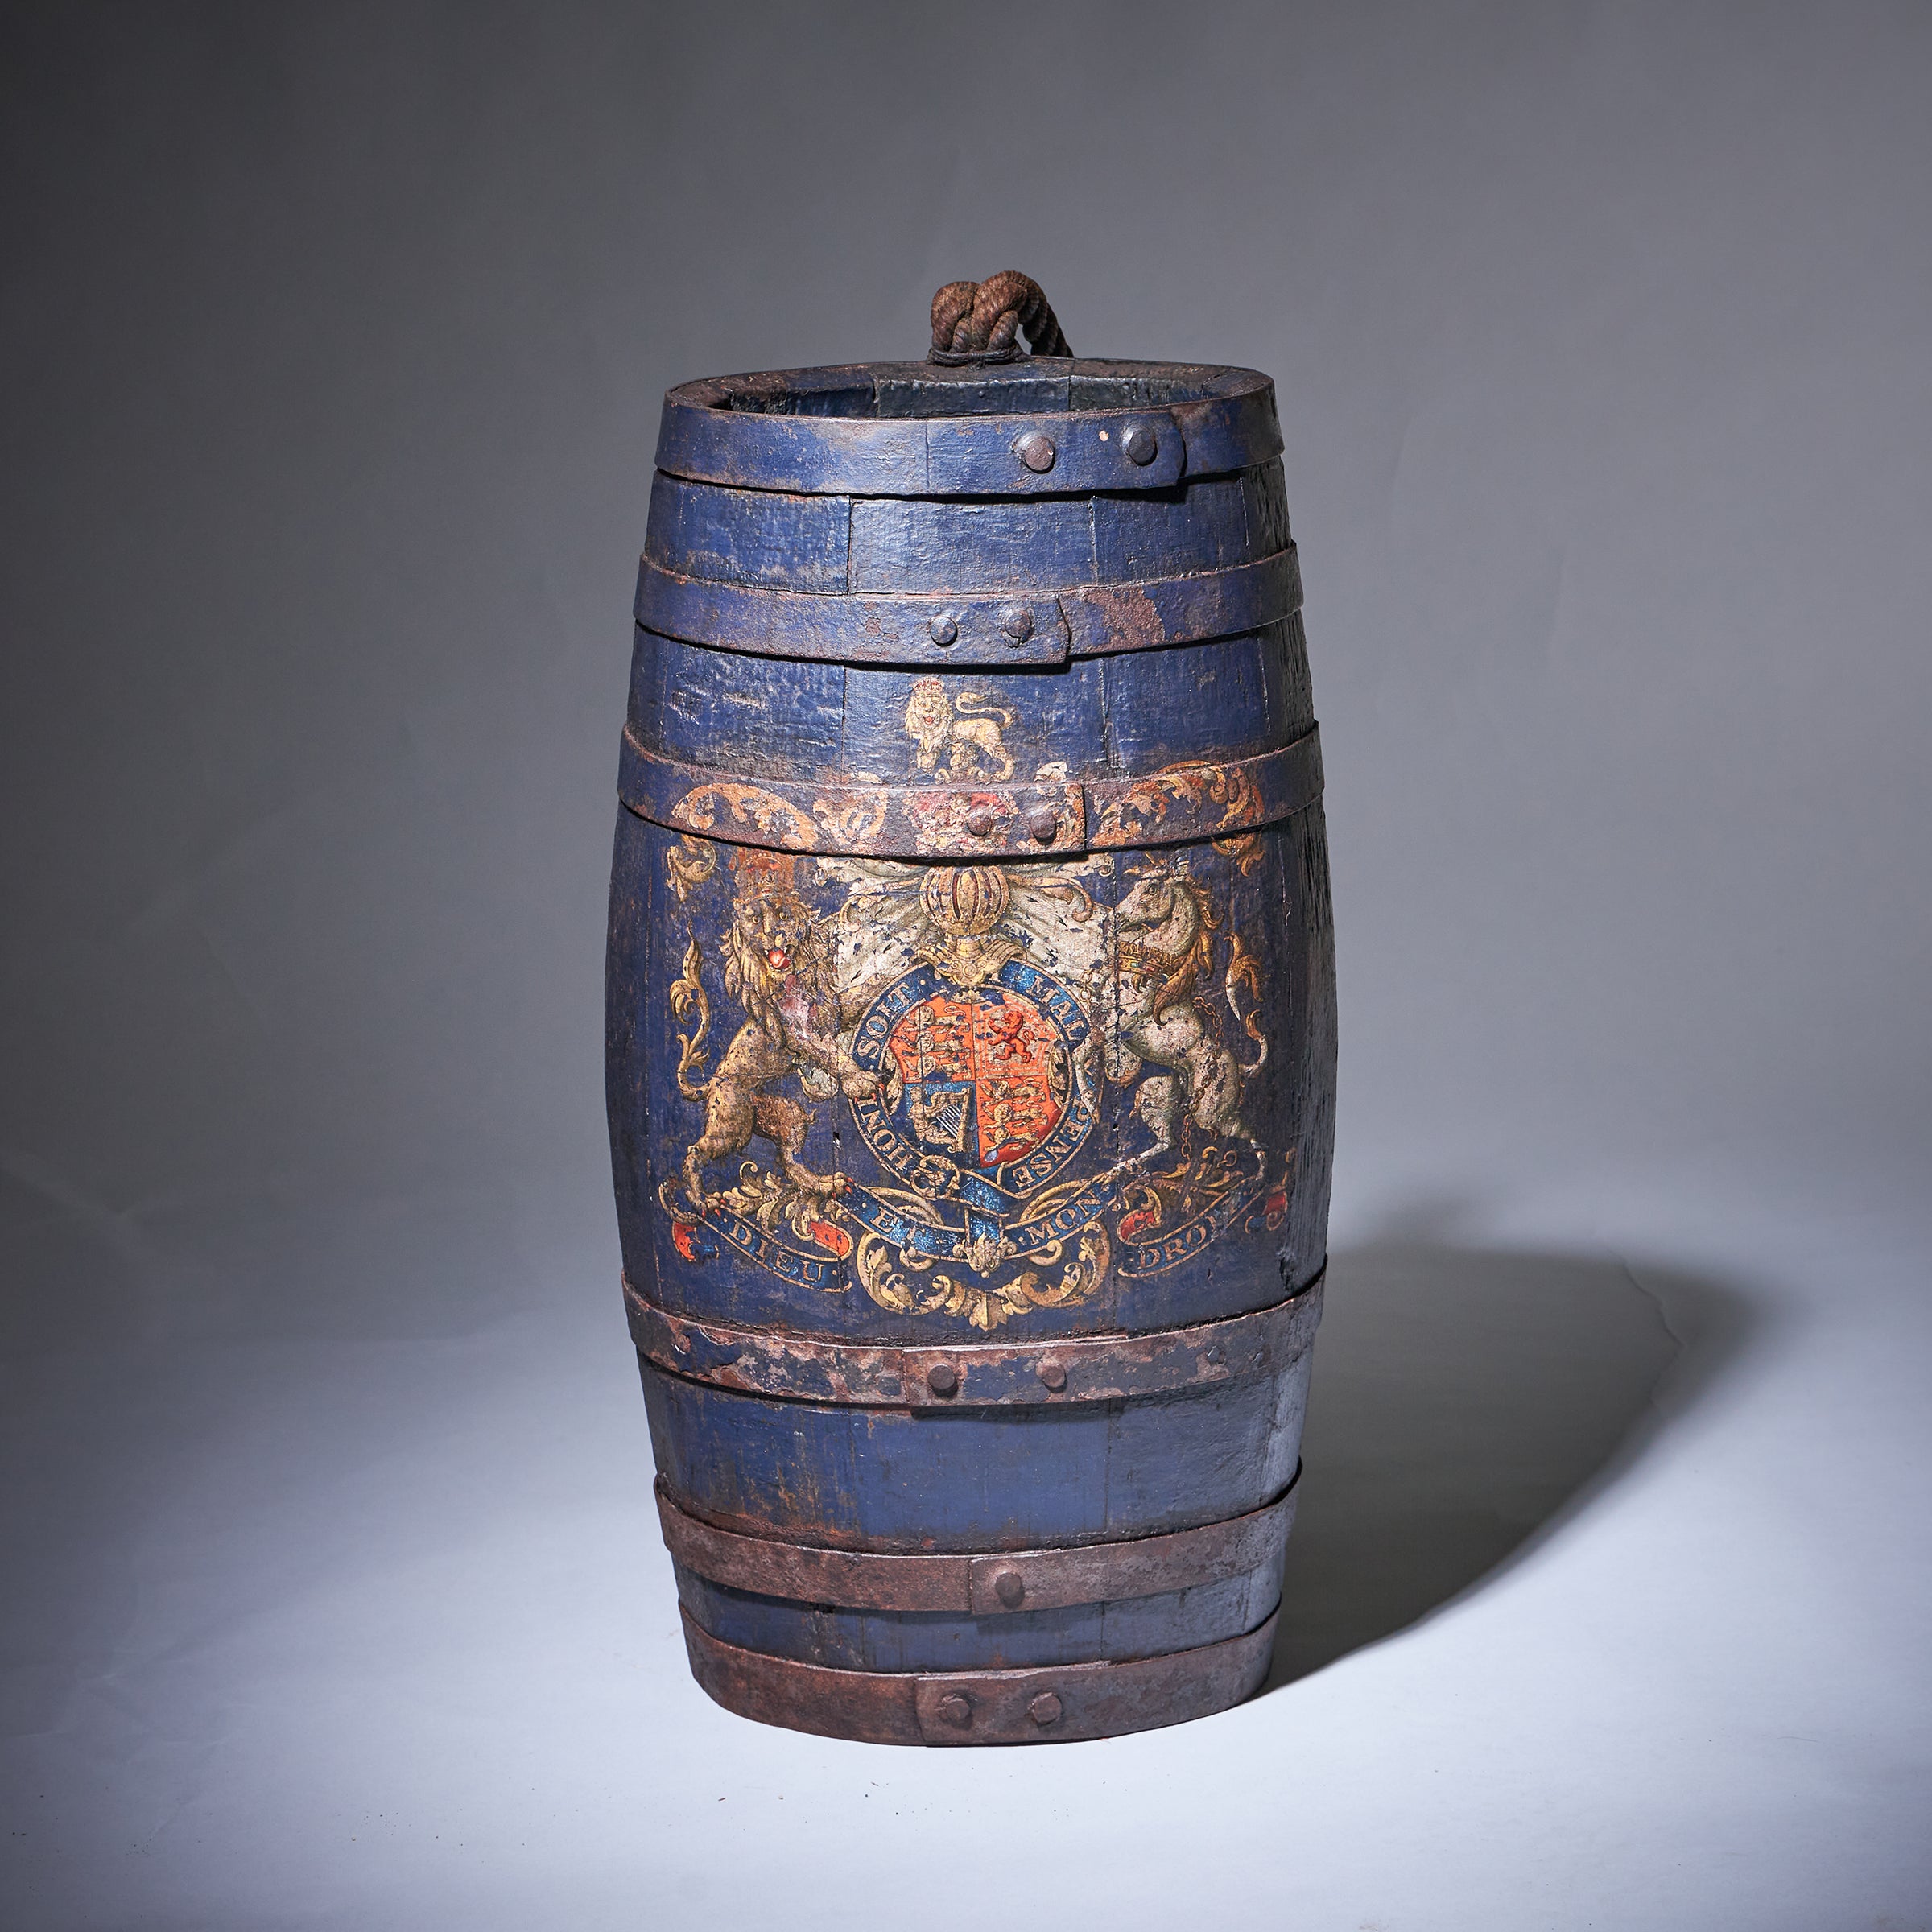 The oak barrel crafted during the 1700’s,  features a hand-painted Royal coat of arms of England on a dark Navy blue ground. Most likely used on a navel ship for gun powder or for serving grog (rum diluted with water and citrus fruits). 

The small